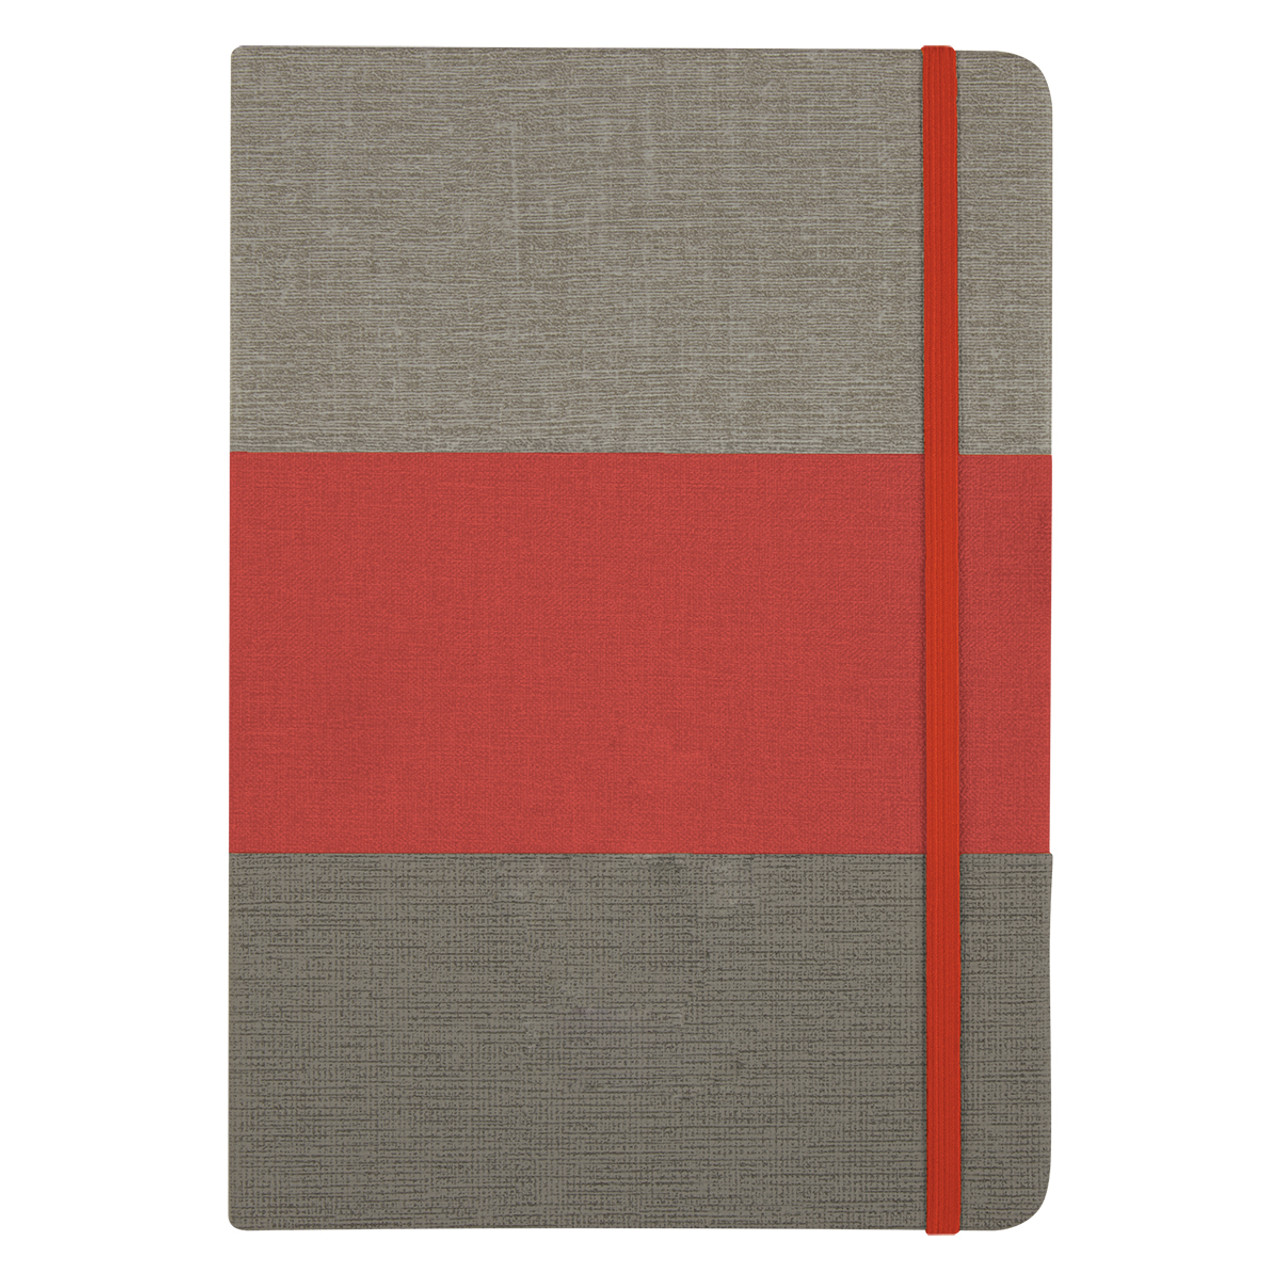 GRAY WITH RED